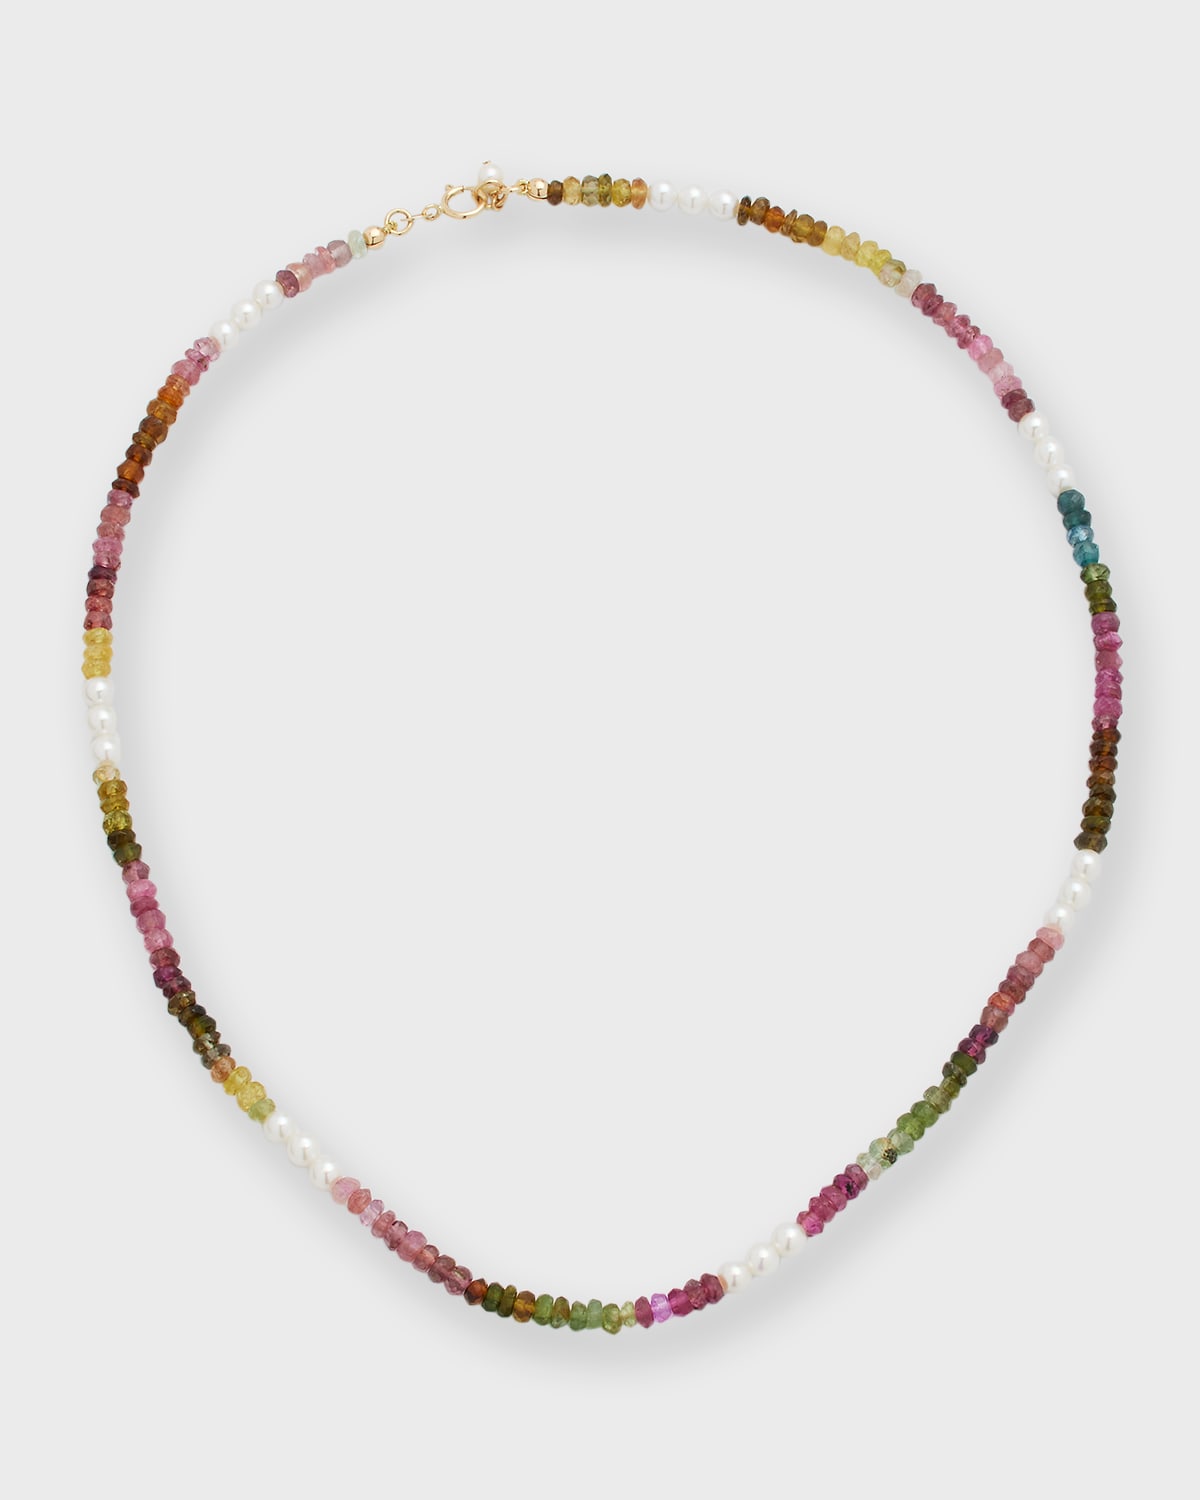 Watermelon Tourmaline and Pearl Bead Necklace